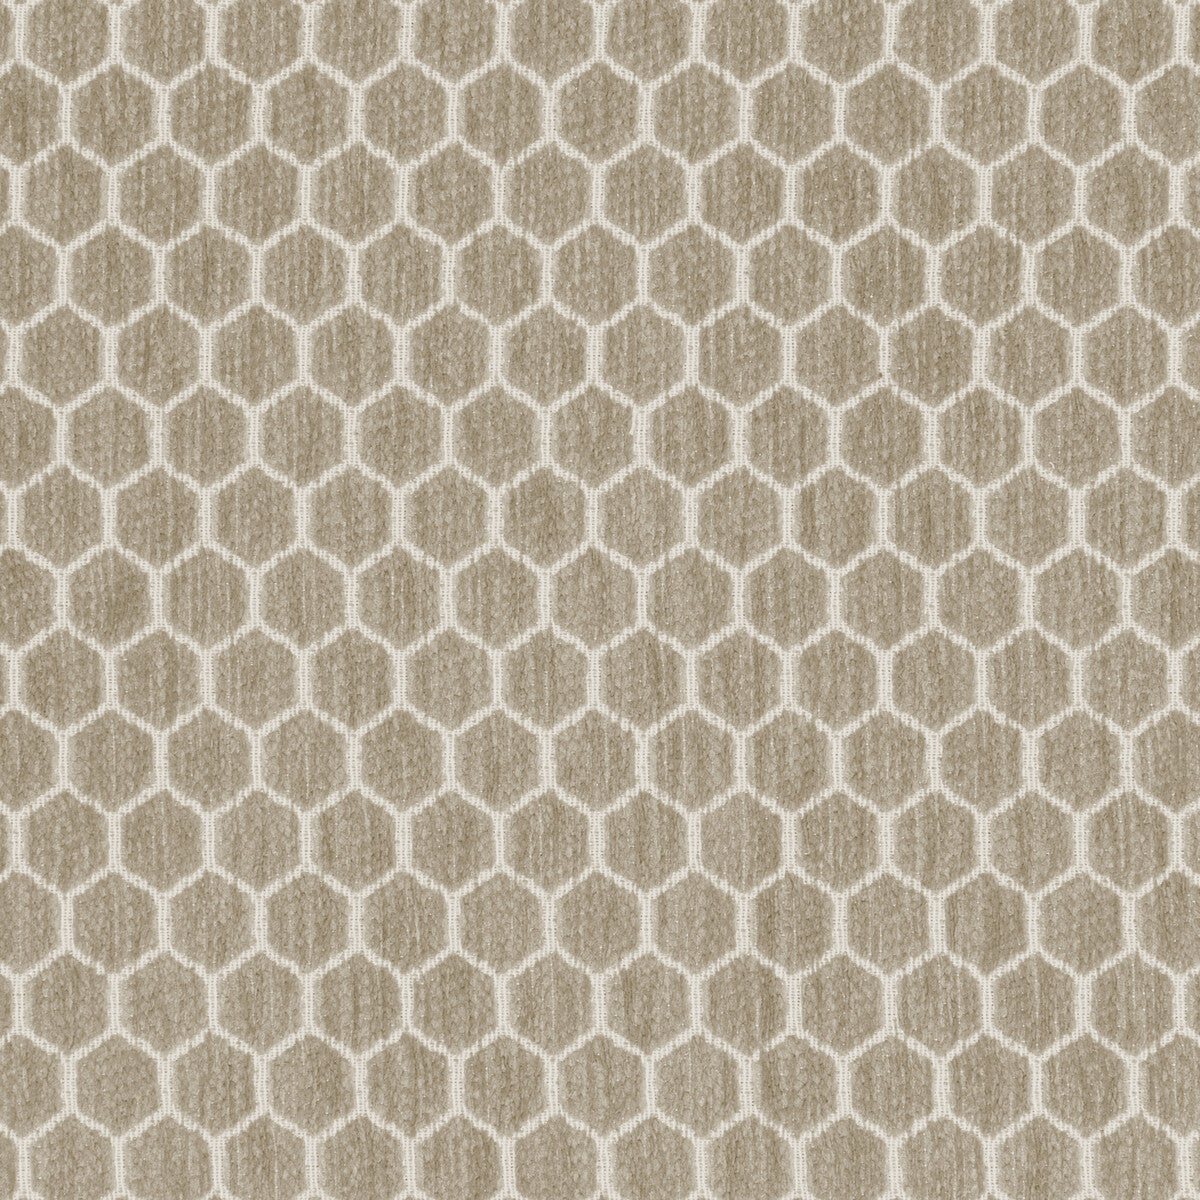 Kravet Design fabric in 36081-106 color - pattern 36081.106.0 - by Kravet Design in the Inside Out Performance Fabrics collection